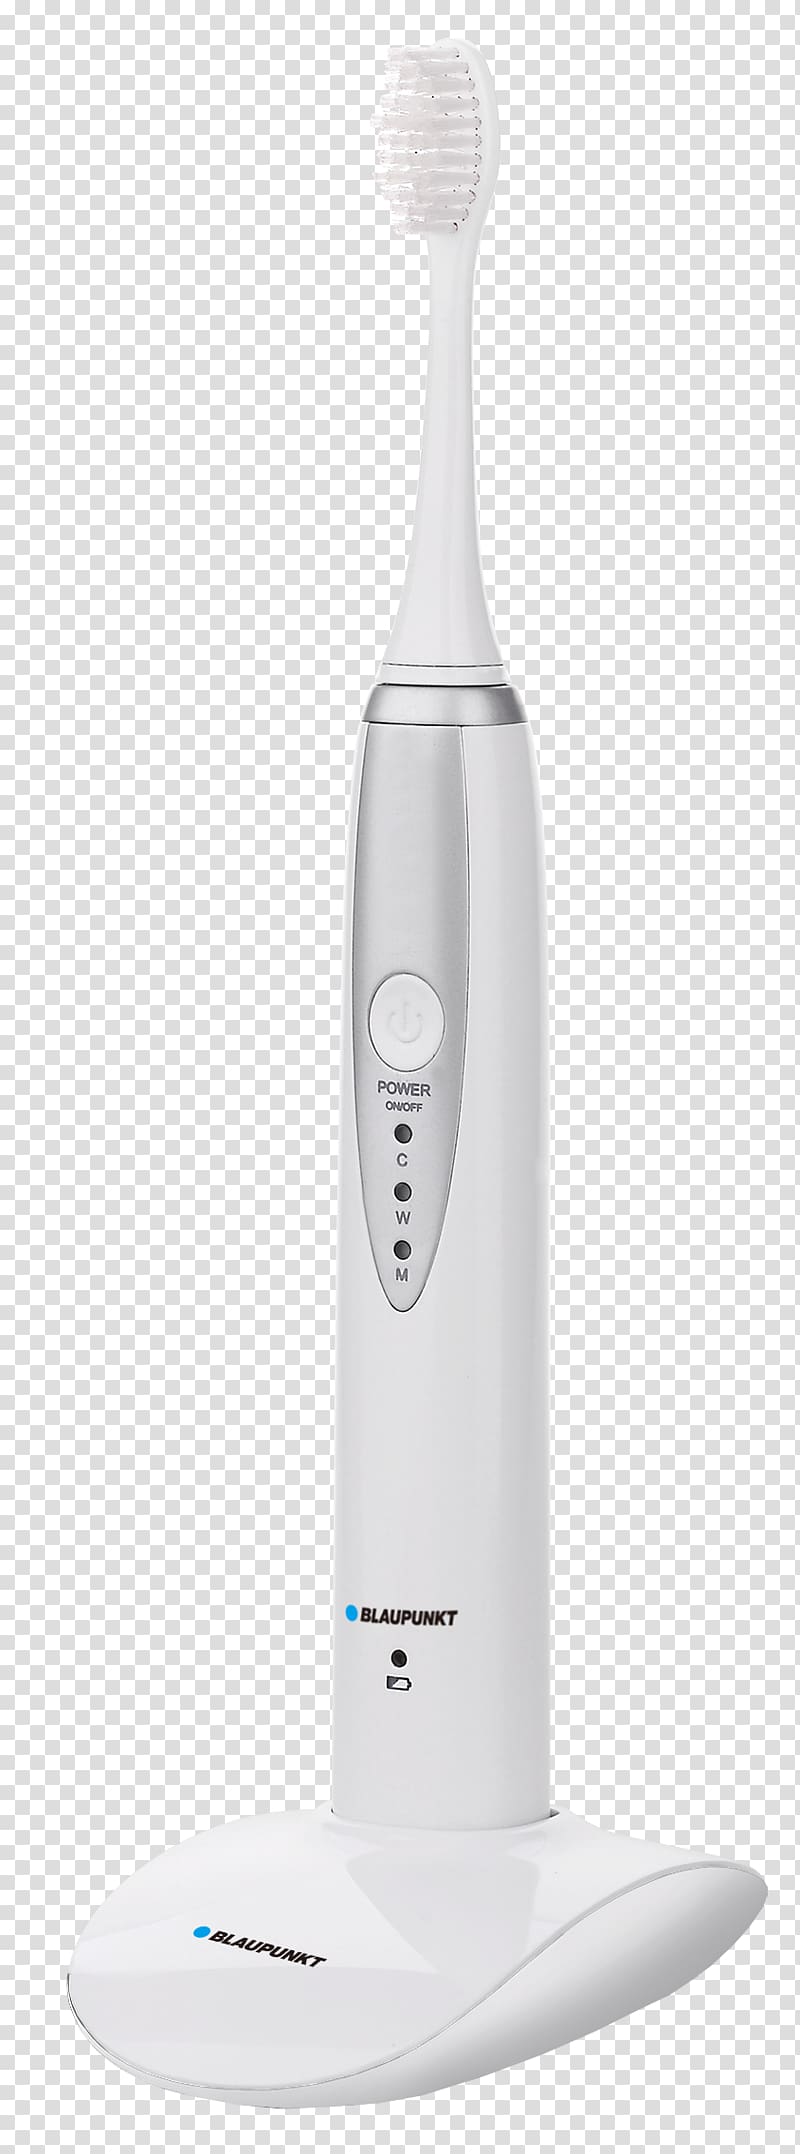 Electric toothbrush Philips Sonicare DiamondClean, Toothbrush transparent background PNG clipart